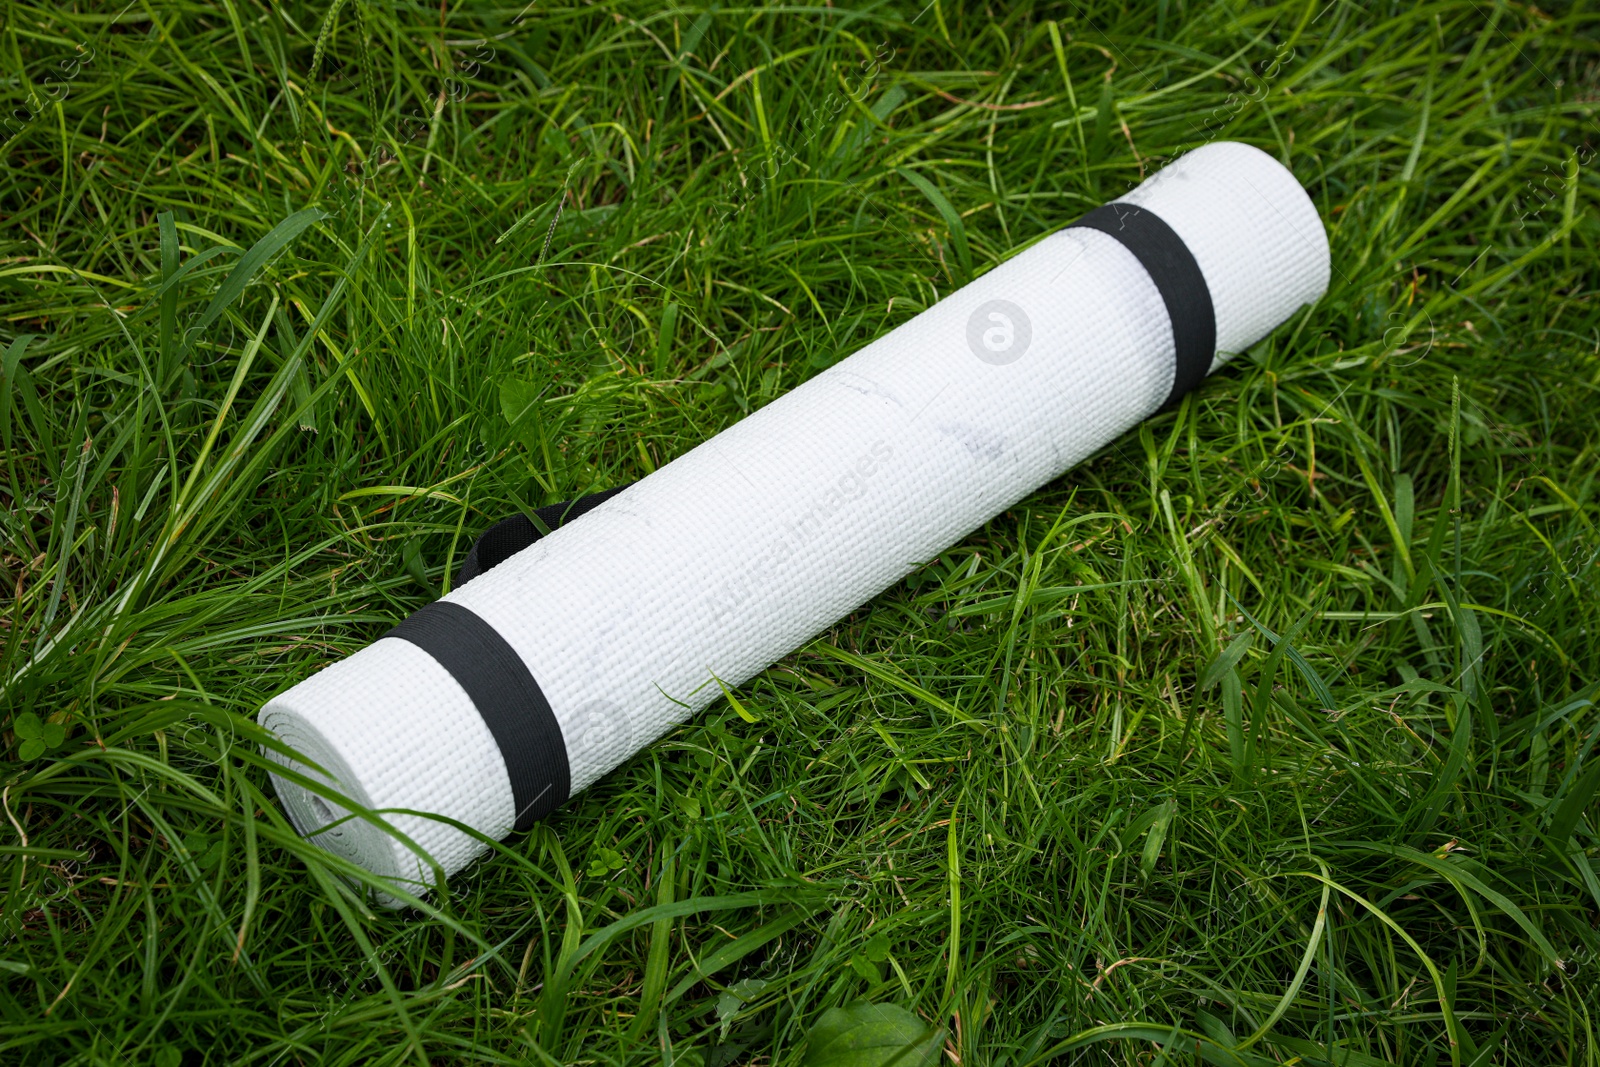 Photo of White karemat or fitness mat on green grass outdoors